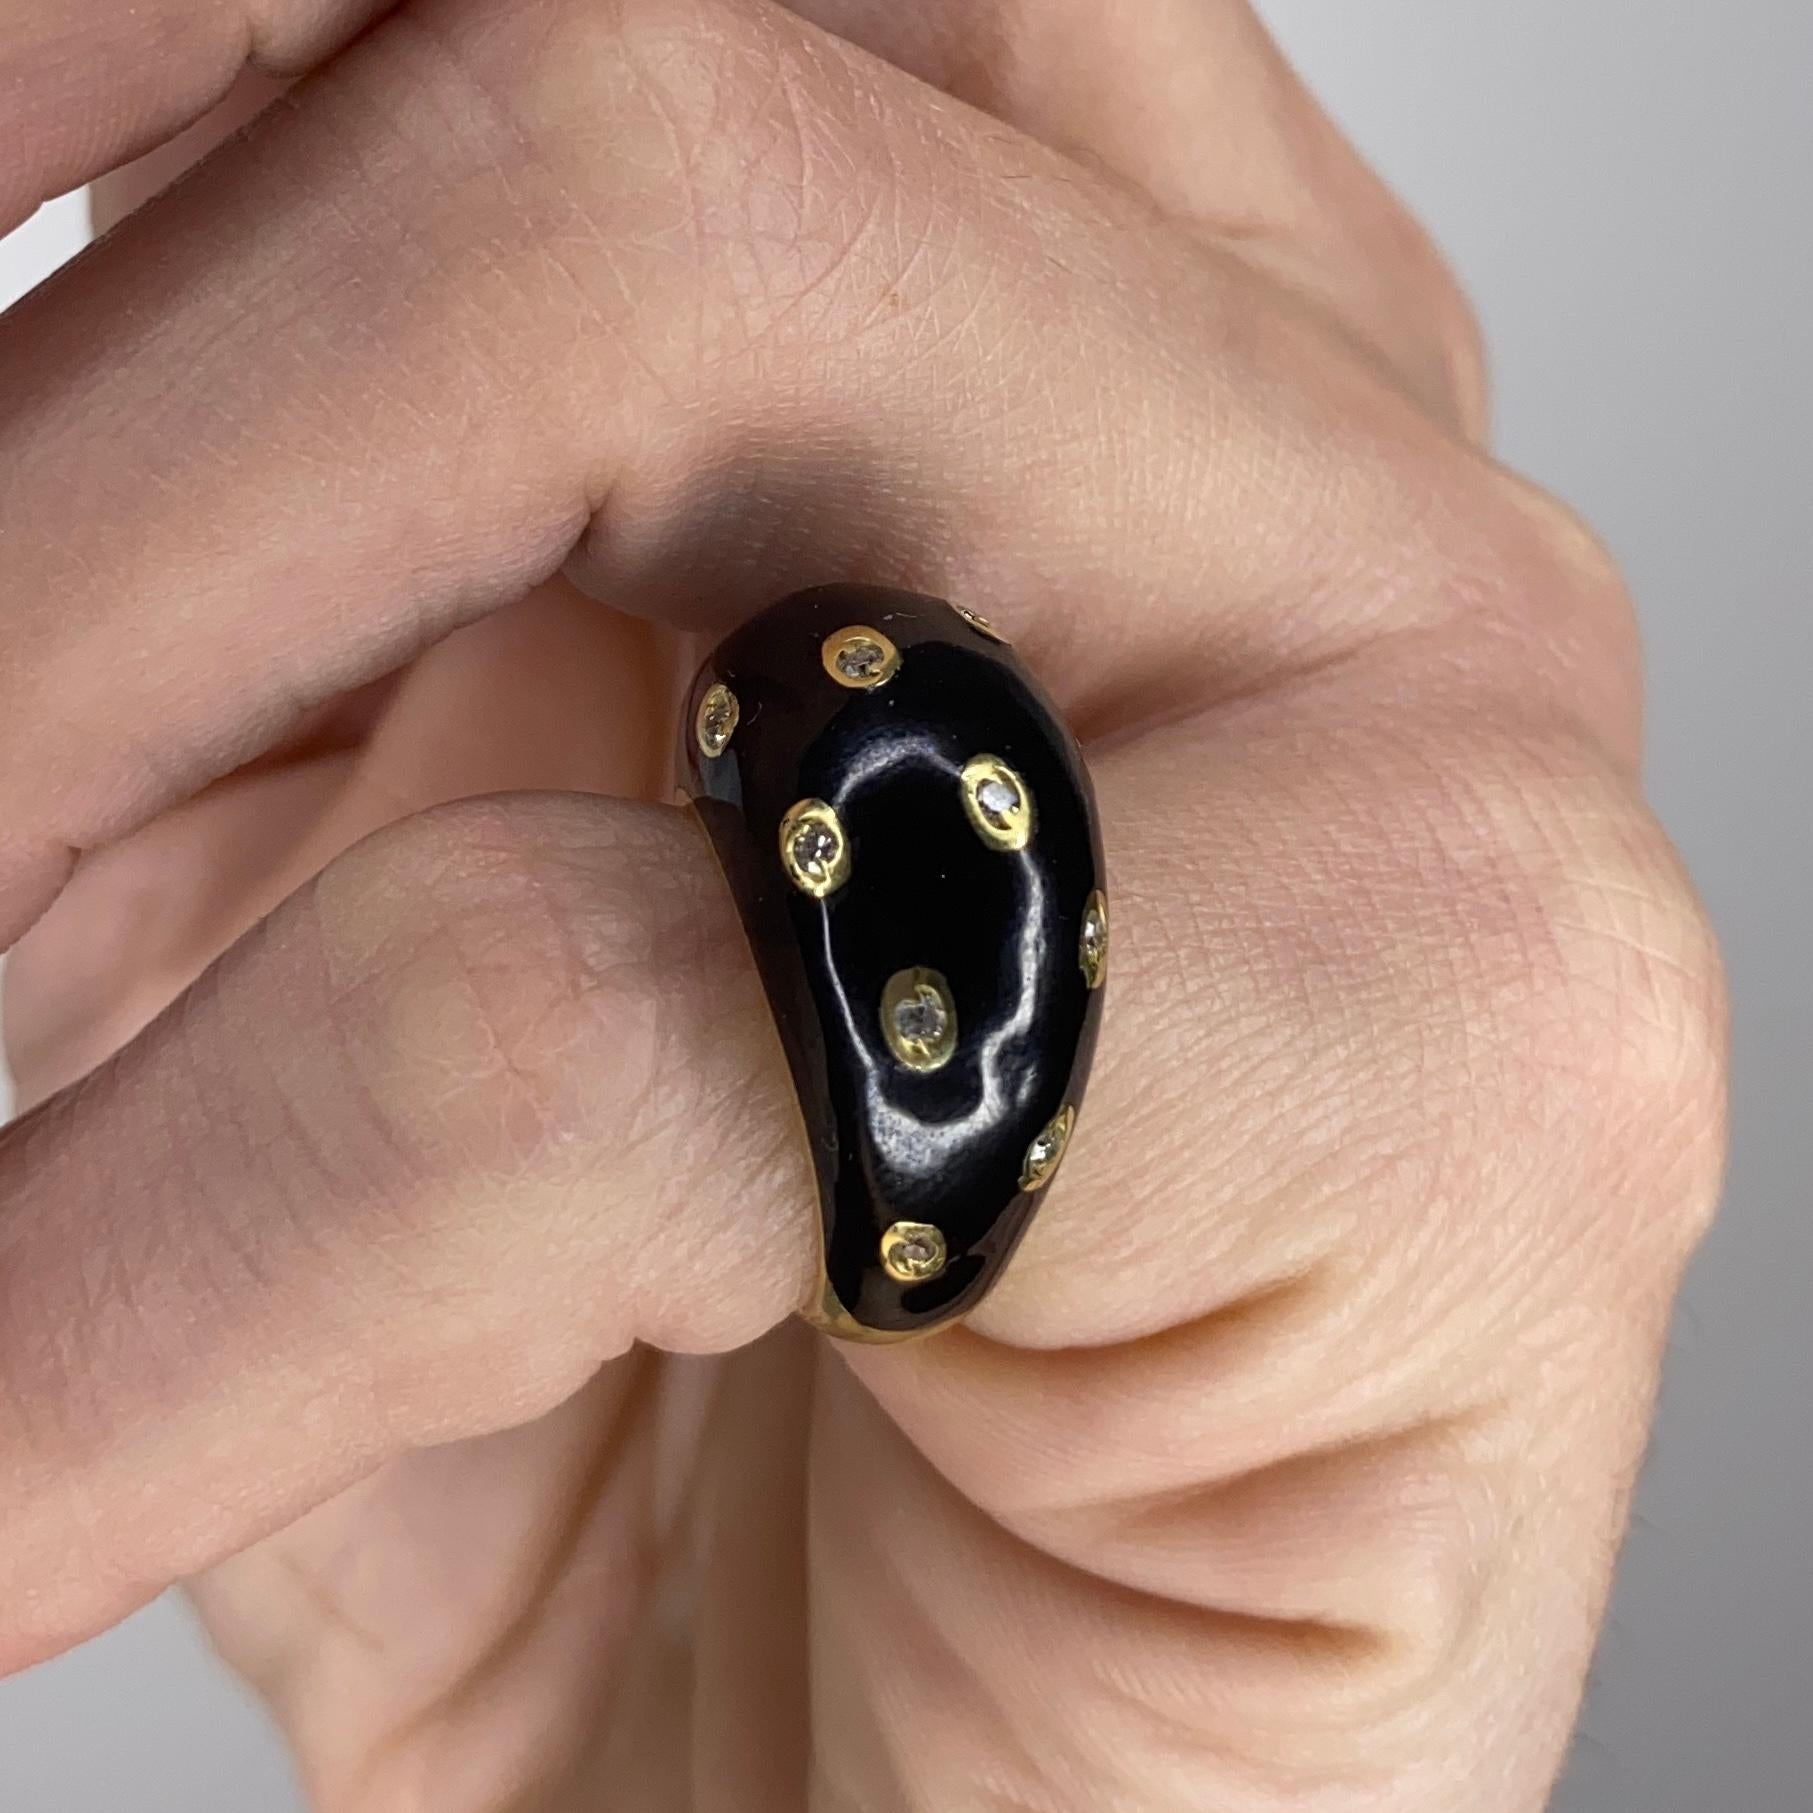 Panther pattern ring designed by Piaget.

Very nice and unusual cocktail ring crafted with a domed bombe shape in solid yellow gold of 18 karats and embellished with applications of black enamel creating a feline skin pattern.

Diamonds: French set